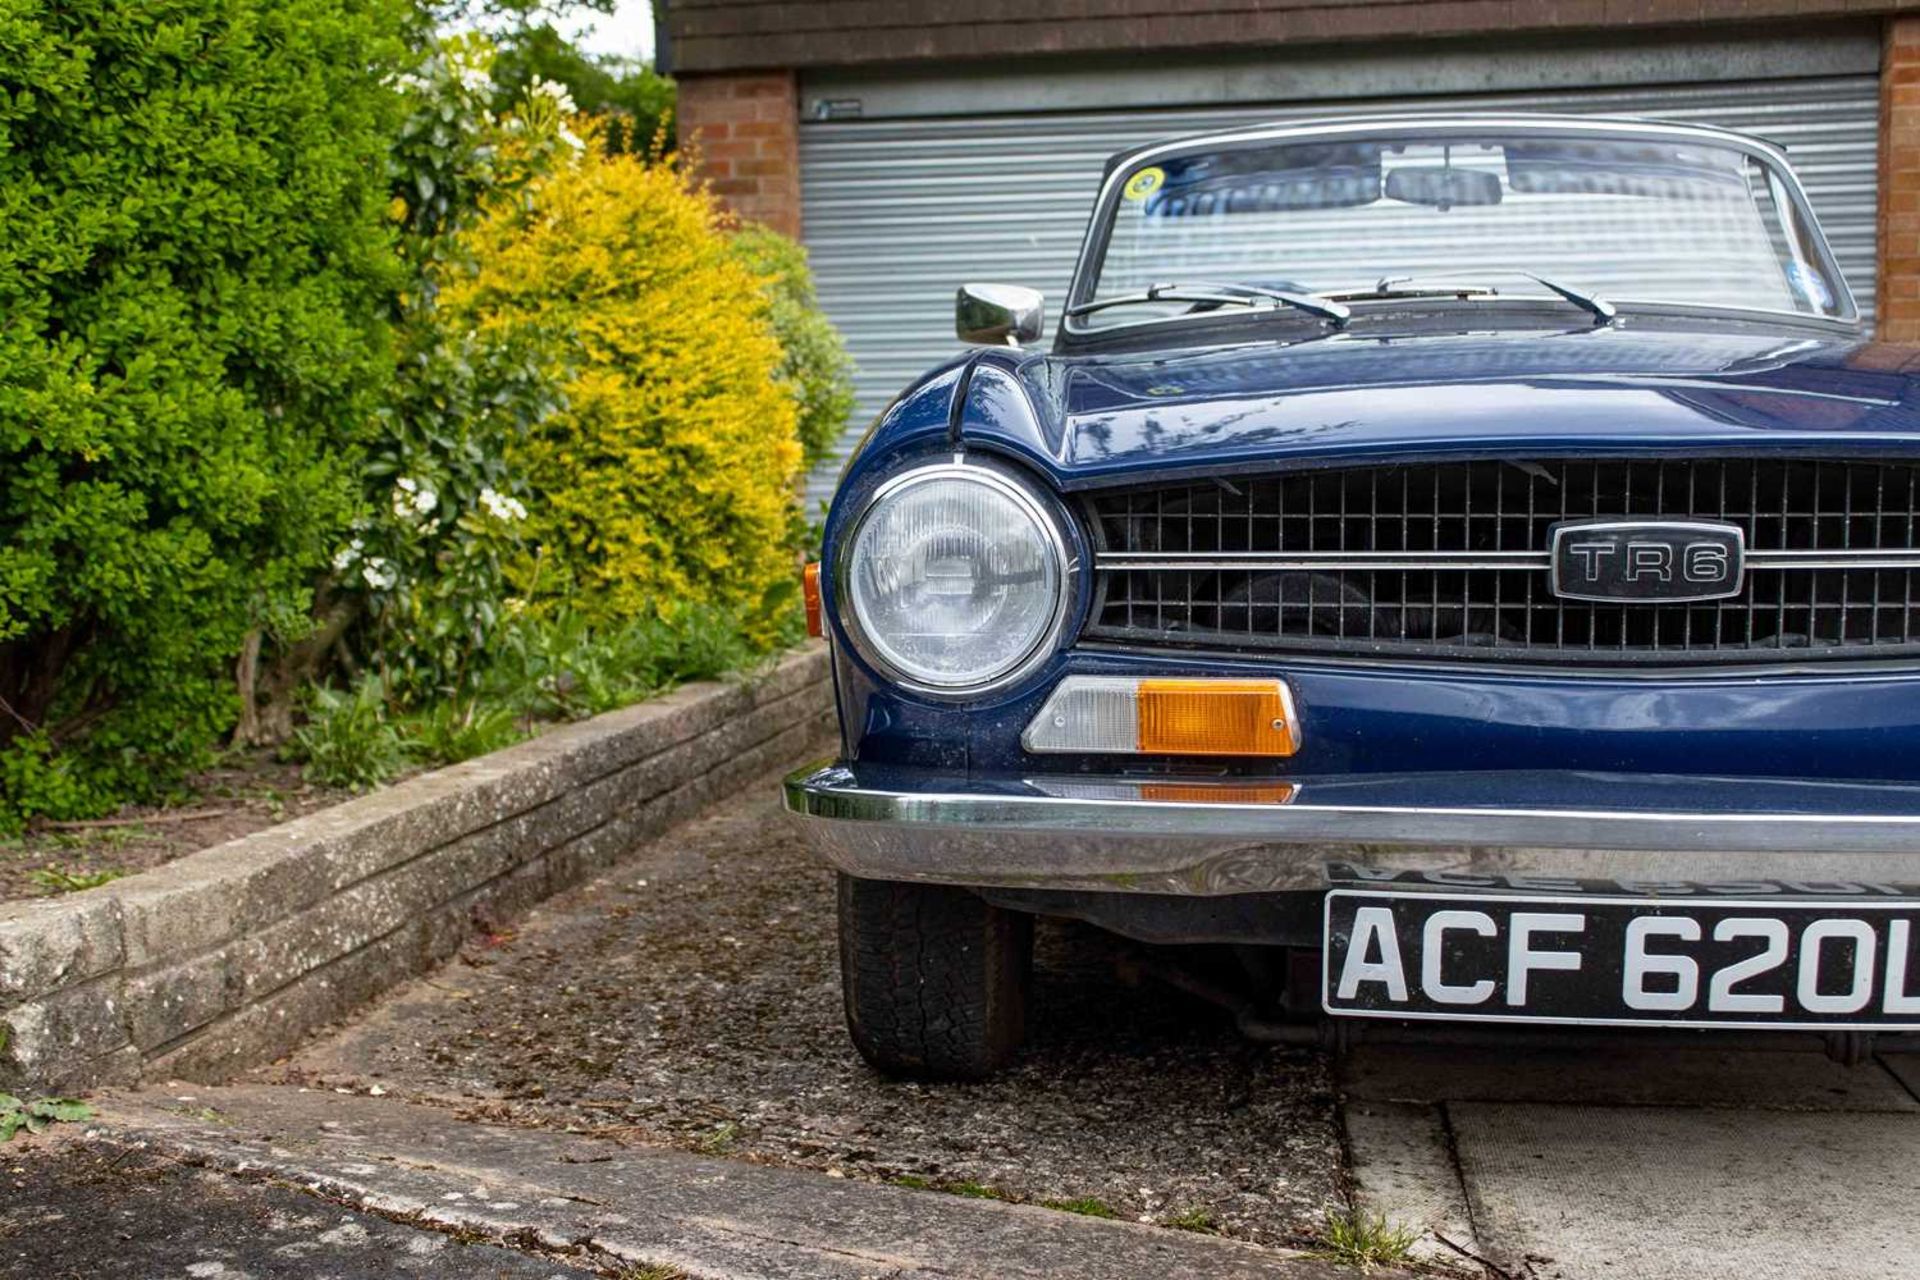 1972 Triumph TR6 Home market example, specified with manual overdrive transmission - Image 16 of 95